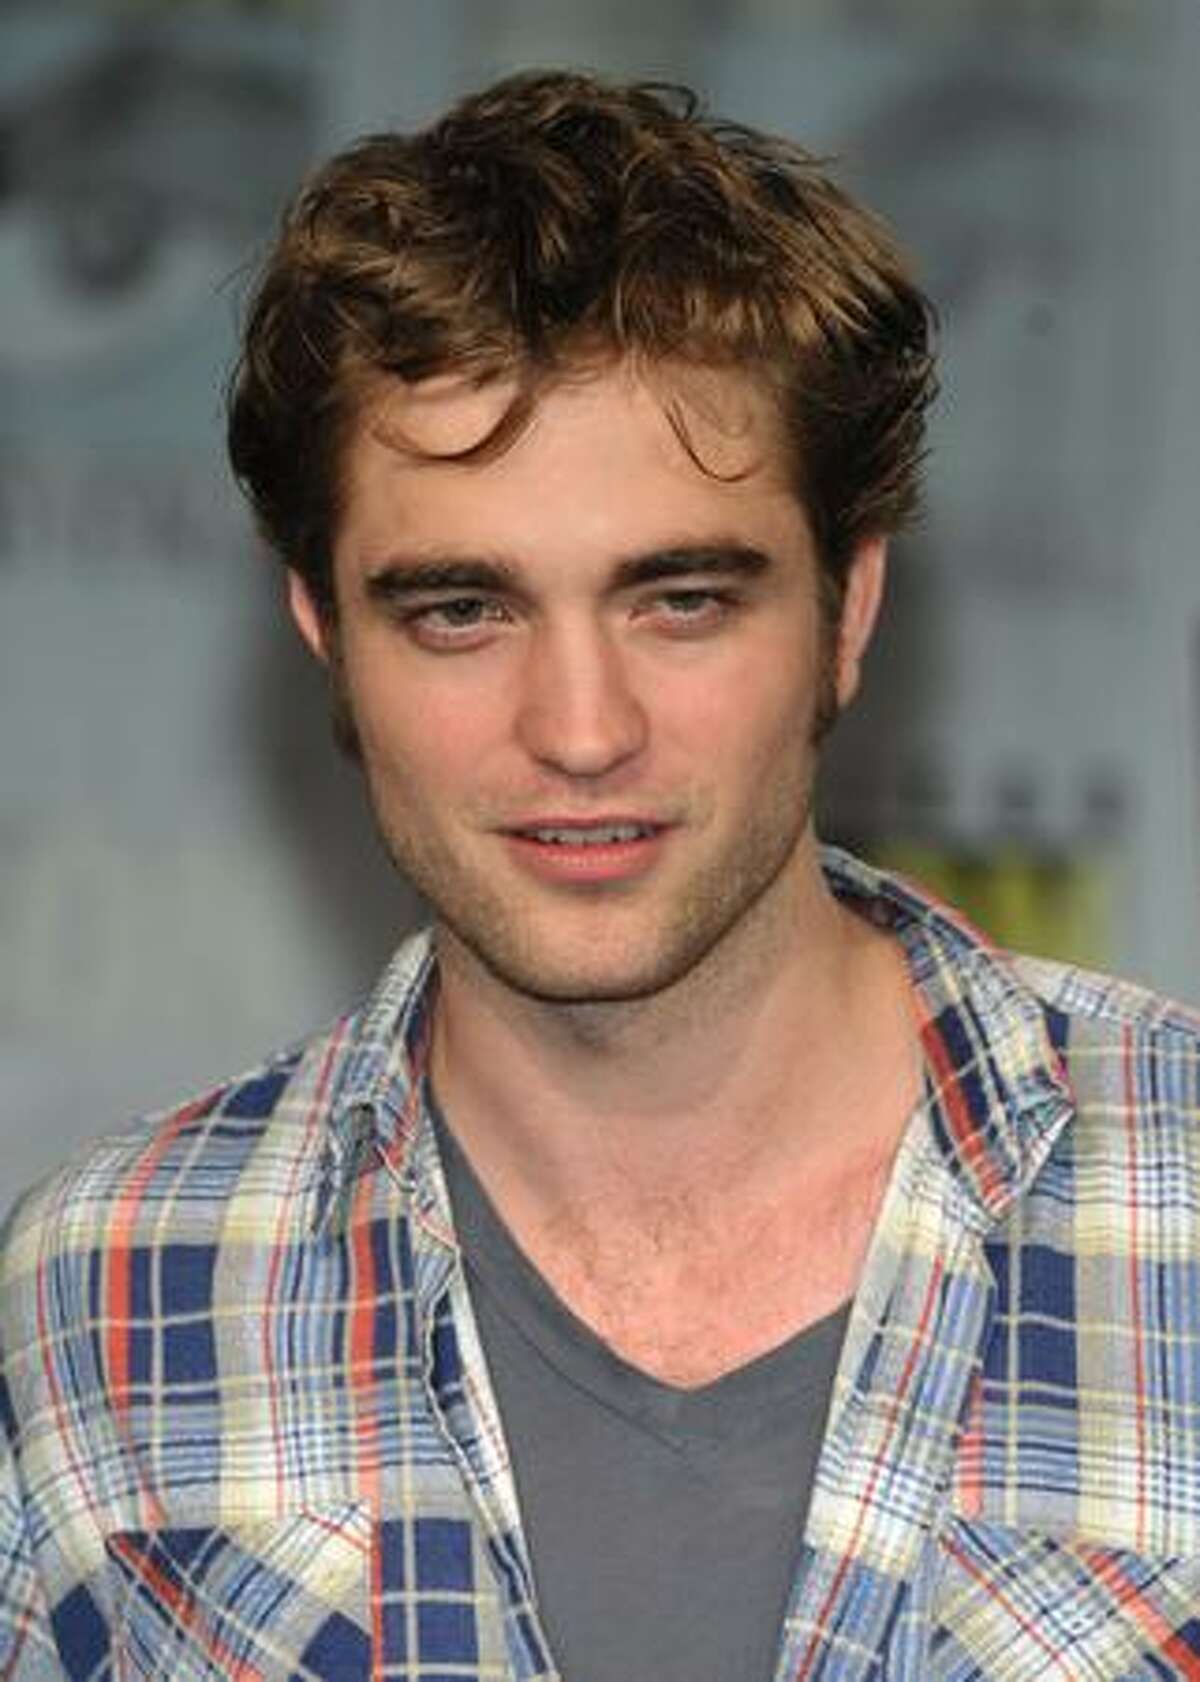 Actor Robert Pattinson speaks at "The Twilight Saga: New Moon" press conference during Comic-Con 2009 held at San Diego Convention Center in San Diego, California.